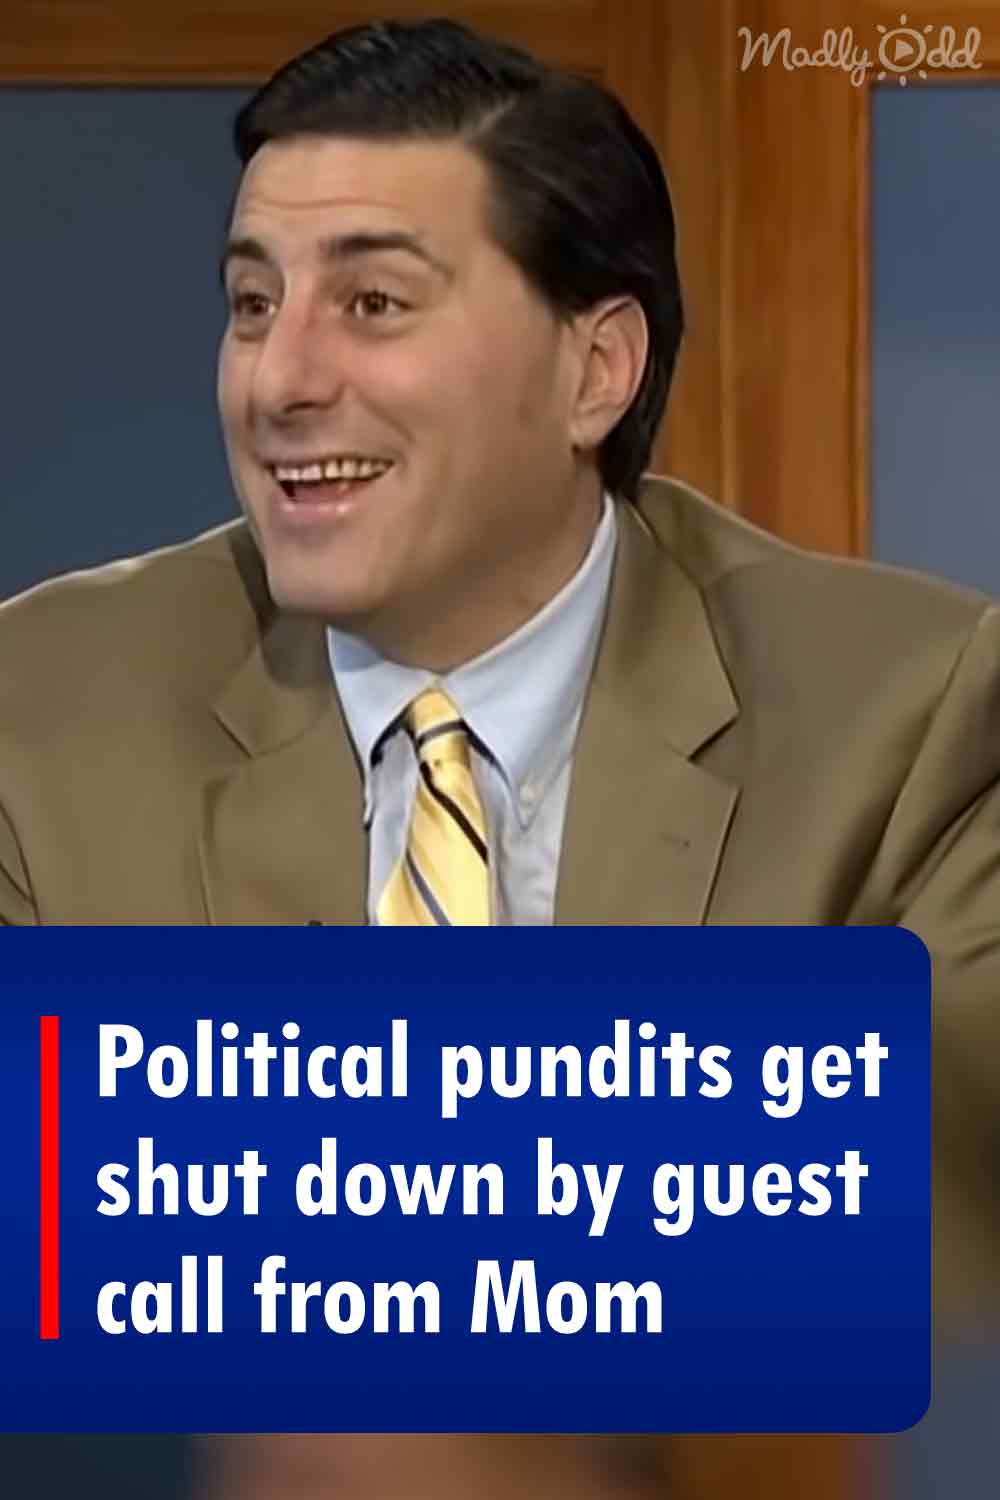 Political pundits get shut down by guest call from Mom